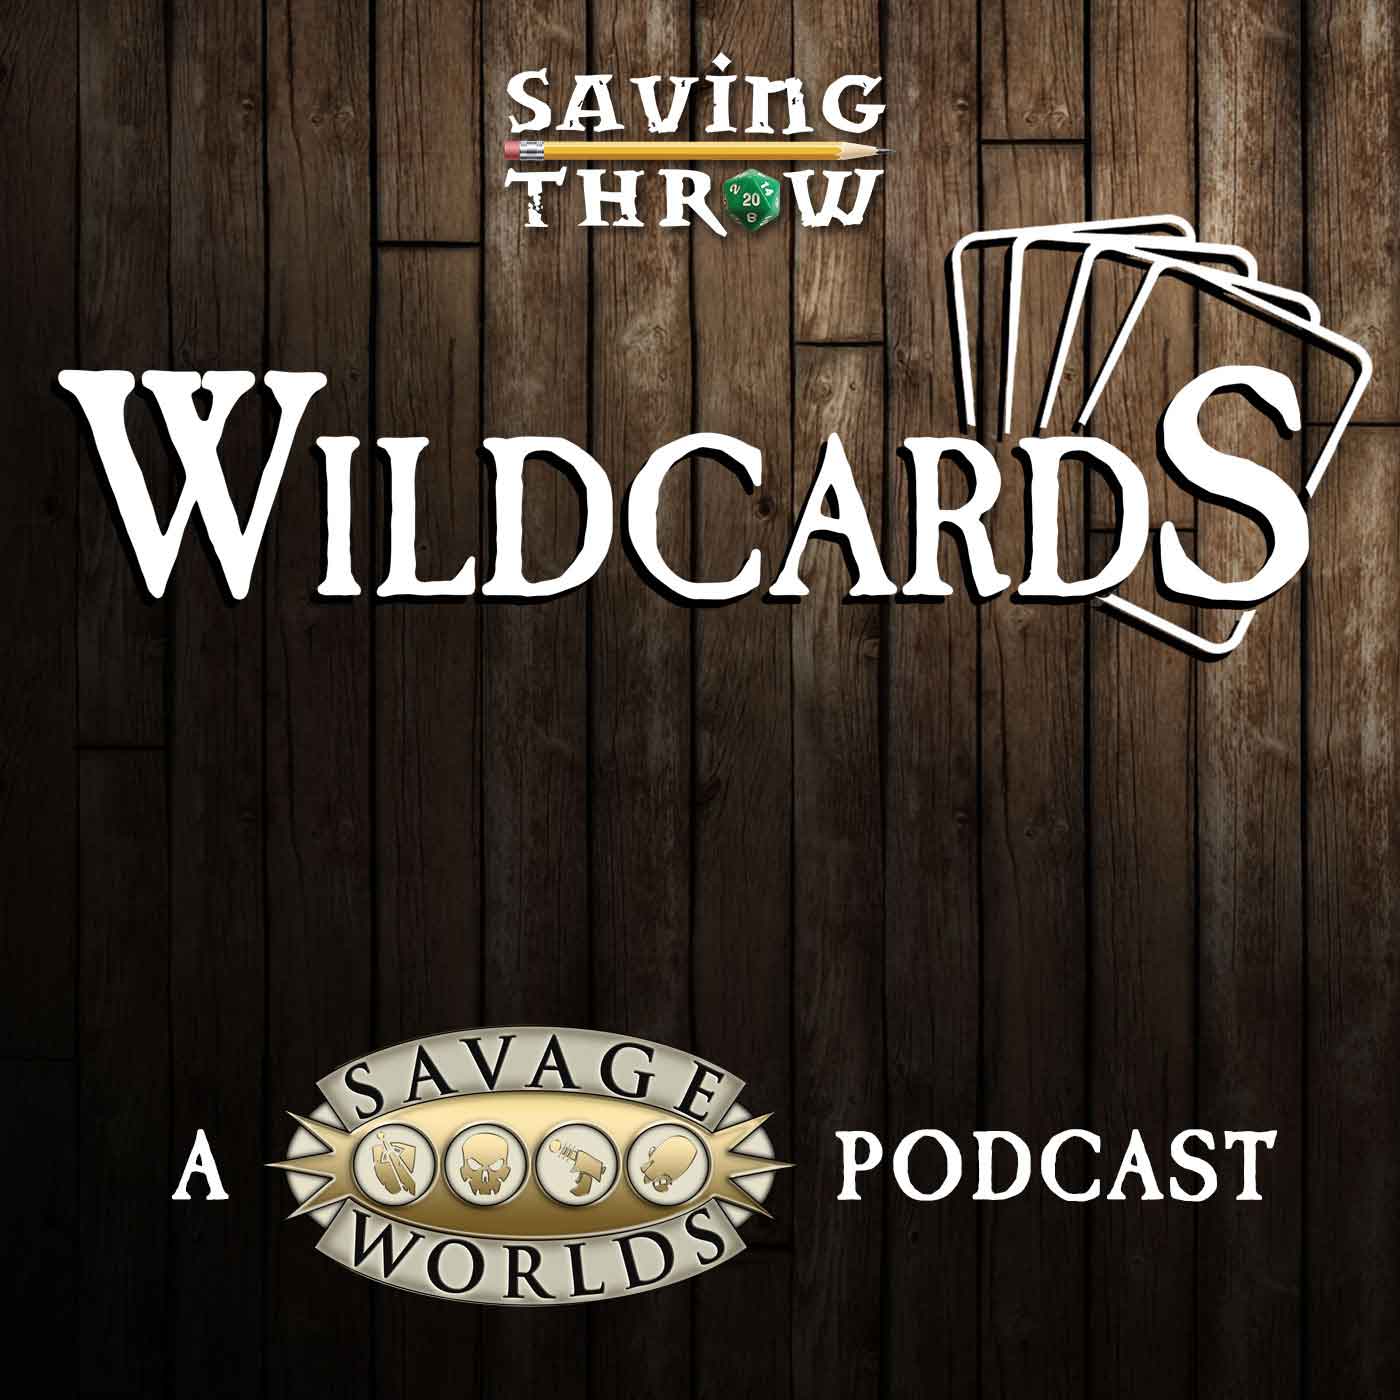 Wildcards podcast show image